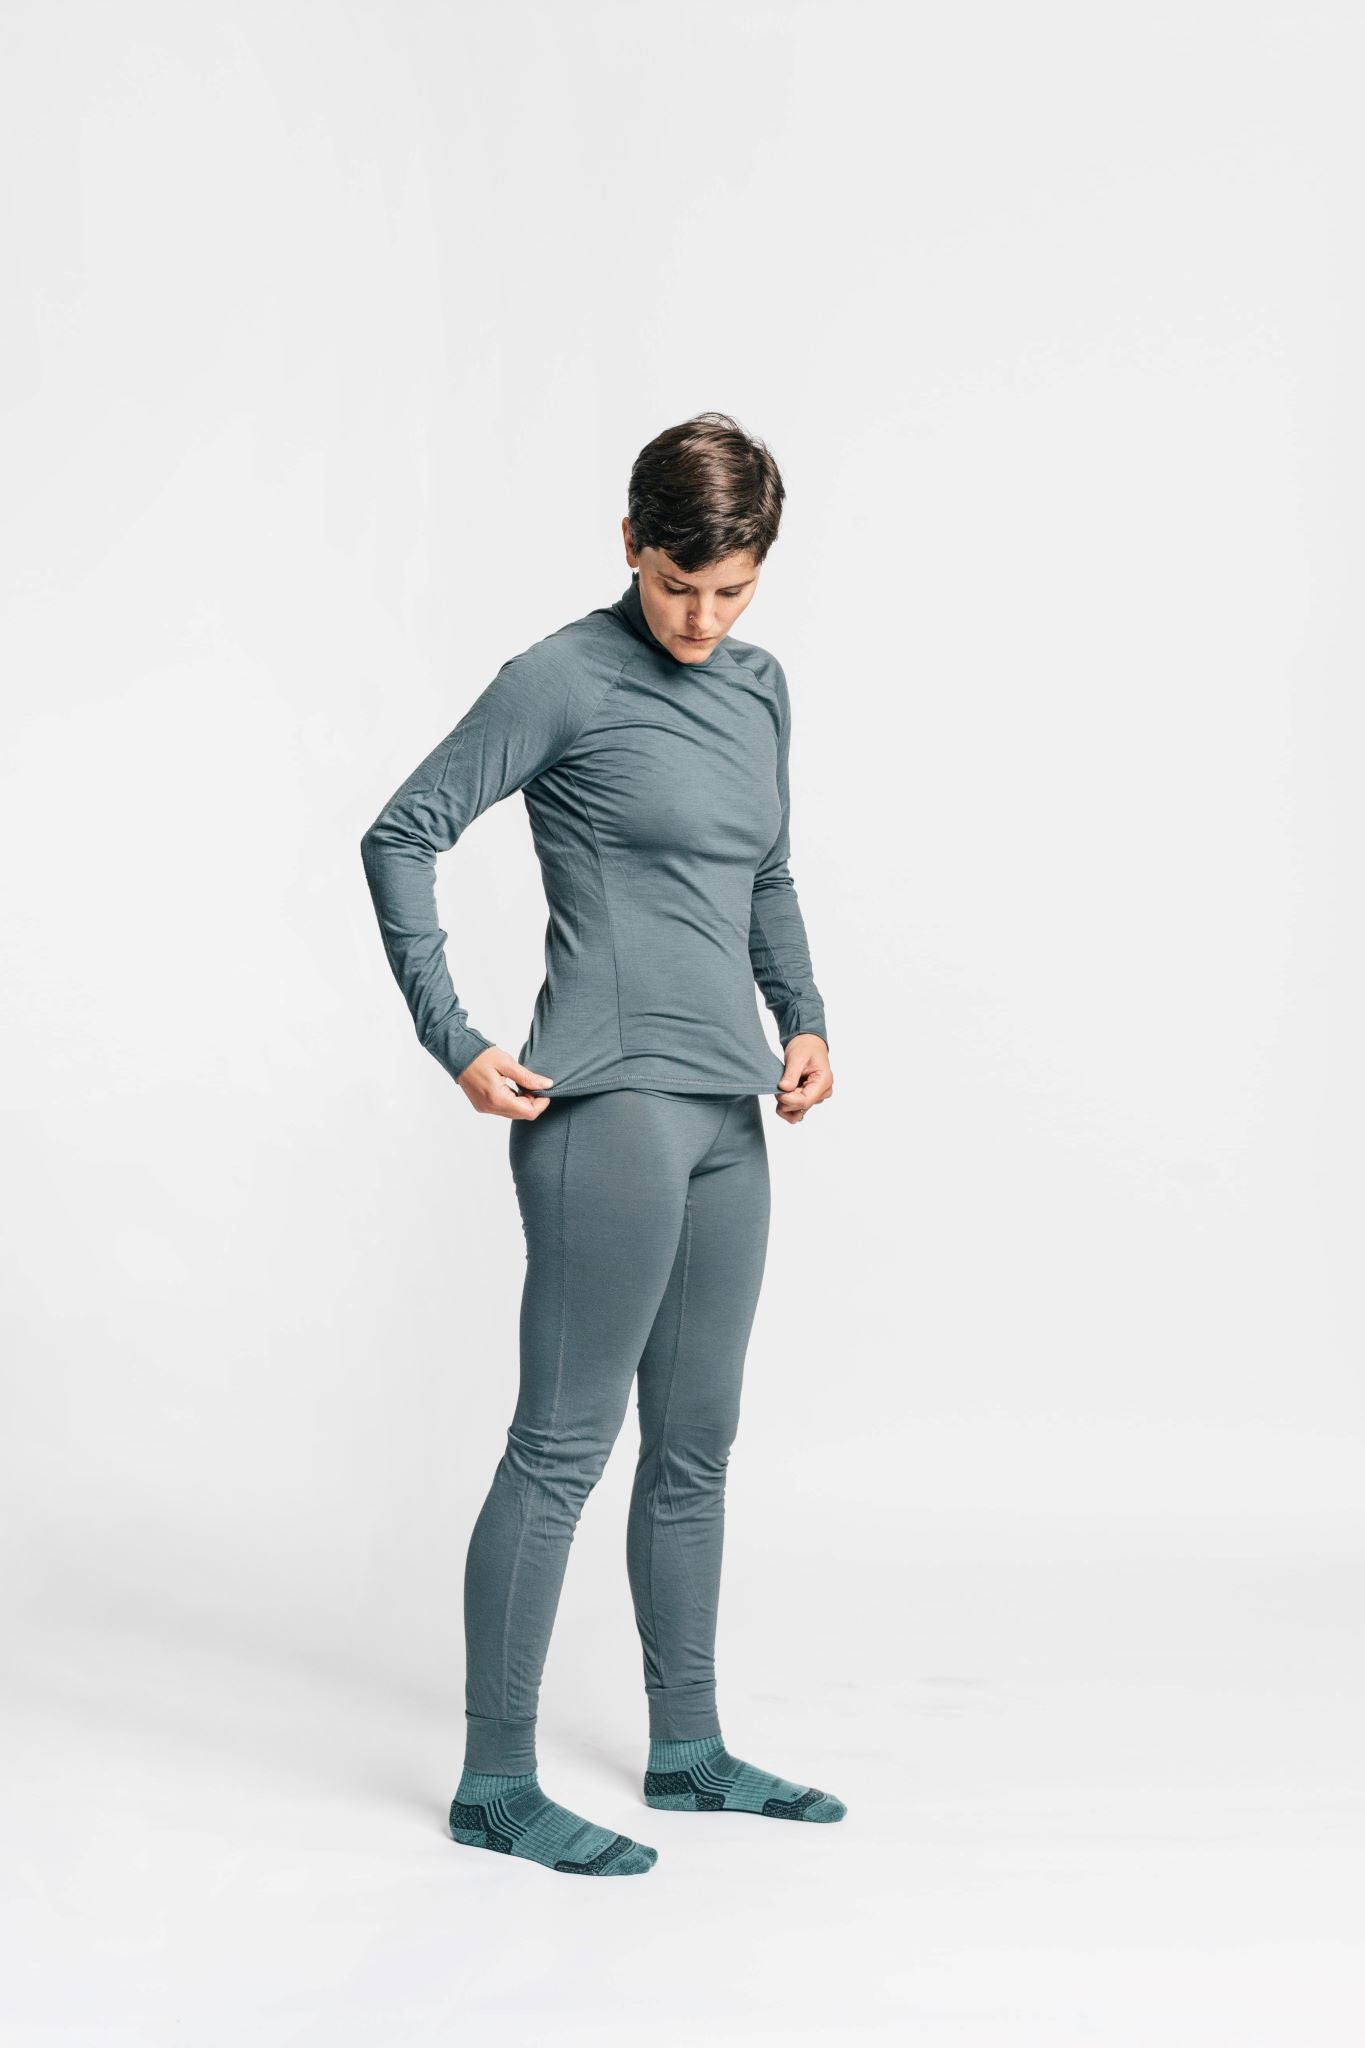 alpine fit merino wool base layer top and bottom on model side view